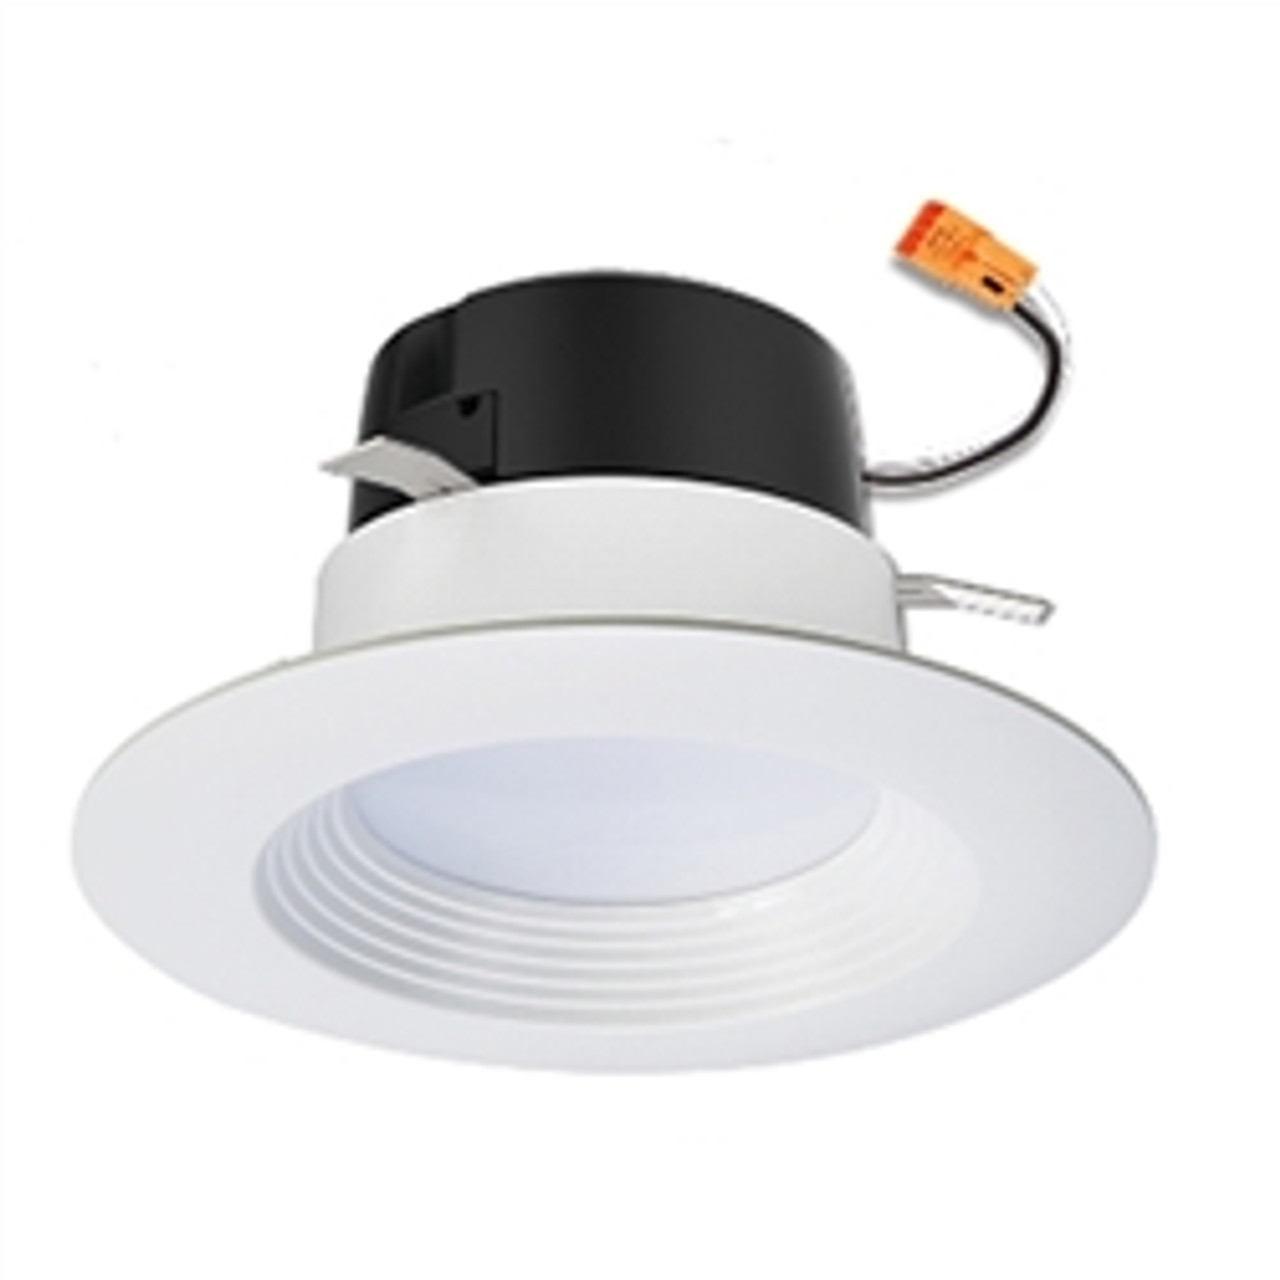 Halo Recessed LT460WH6927R 4" All-Purpose LED Integrated Trim Modules, 2700K, 630 Lumens, White Finish- 2 Pack